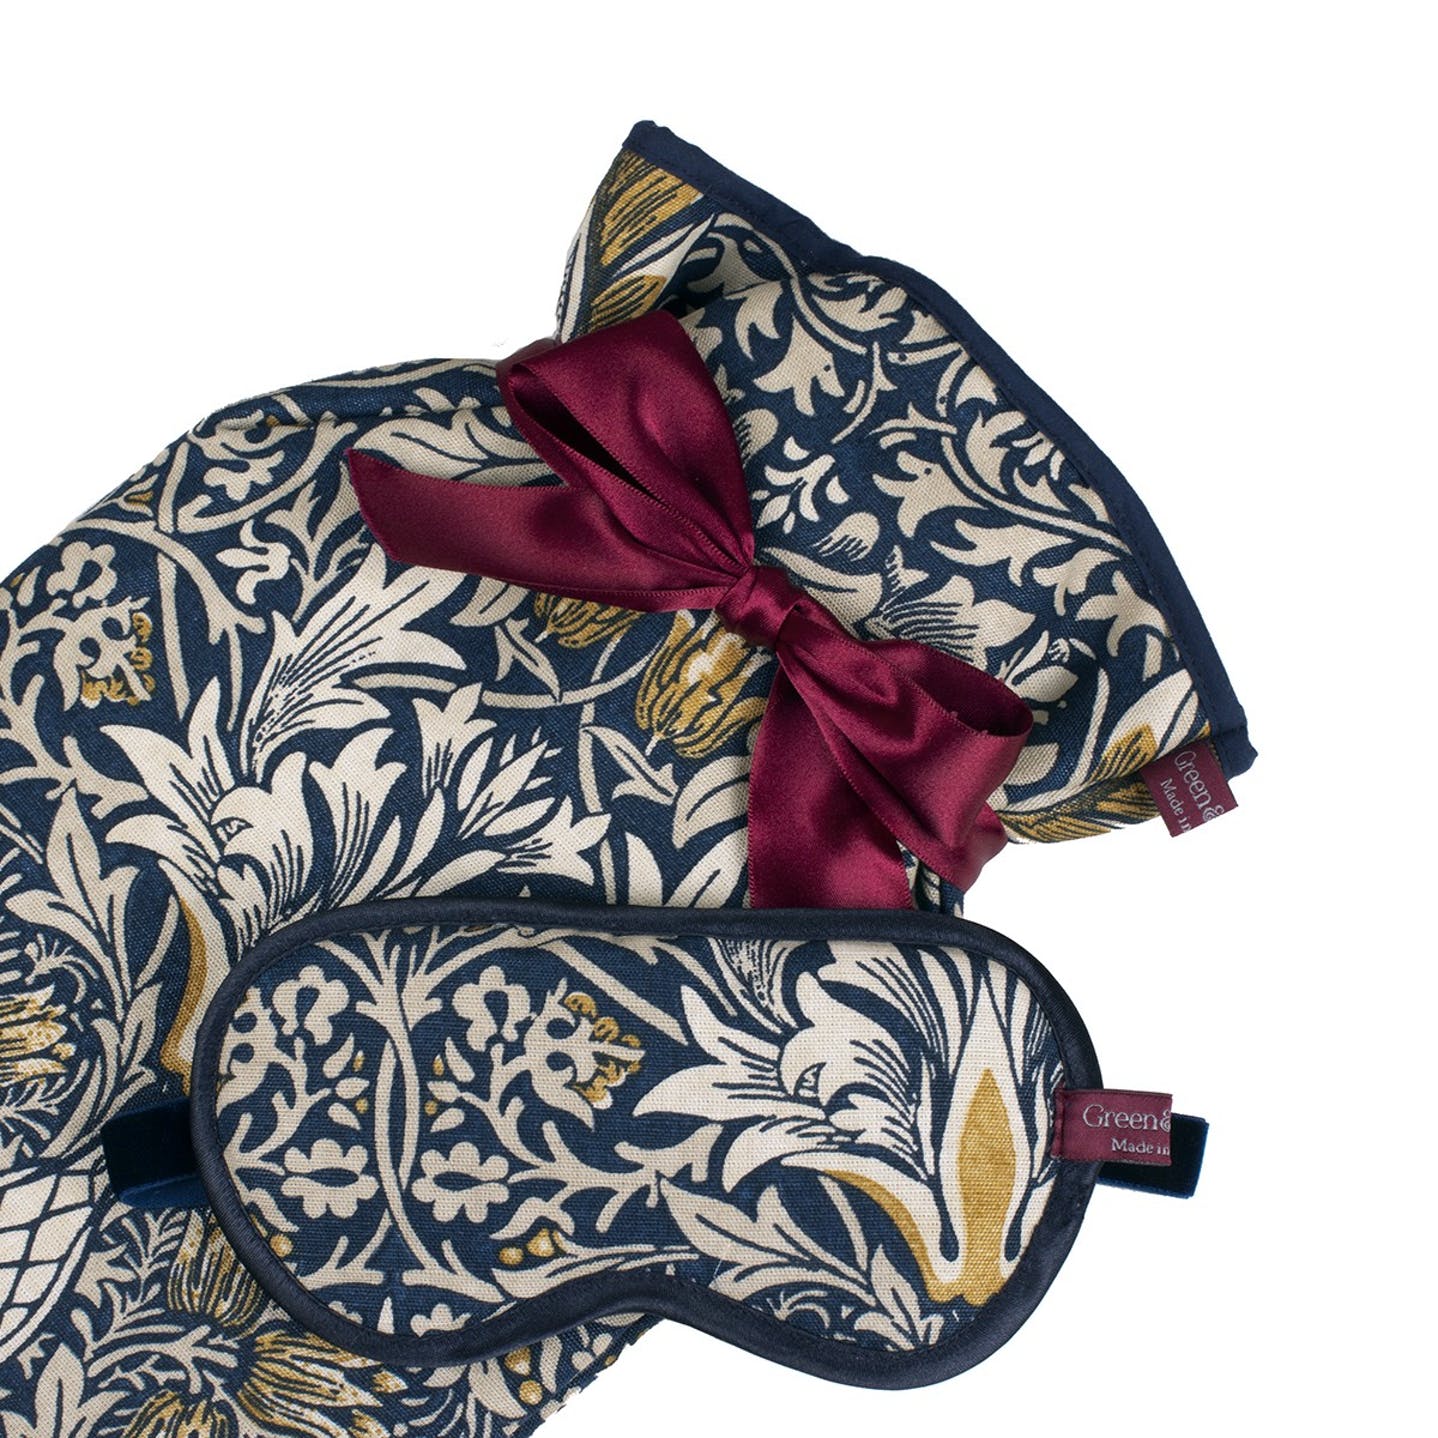 Hot Water Bottle and Lavender Eye Mask in William Morris Fabric by Green & Heath